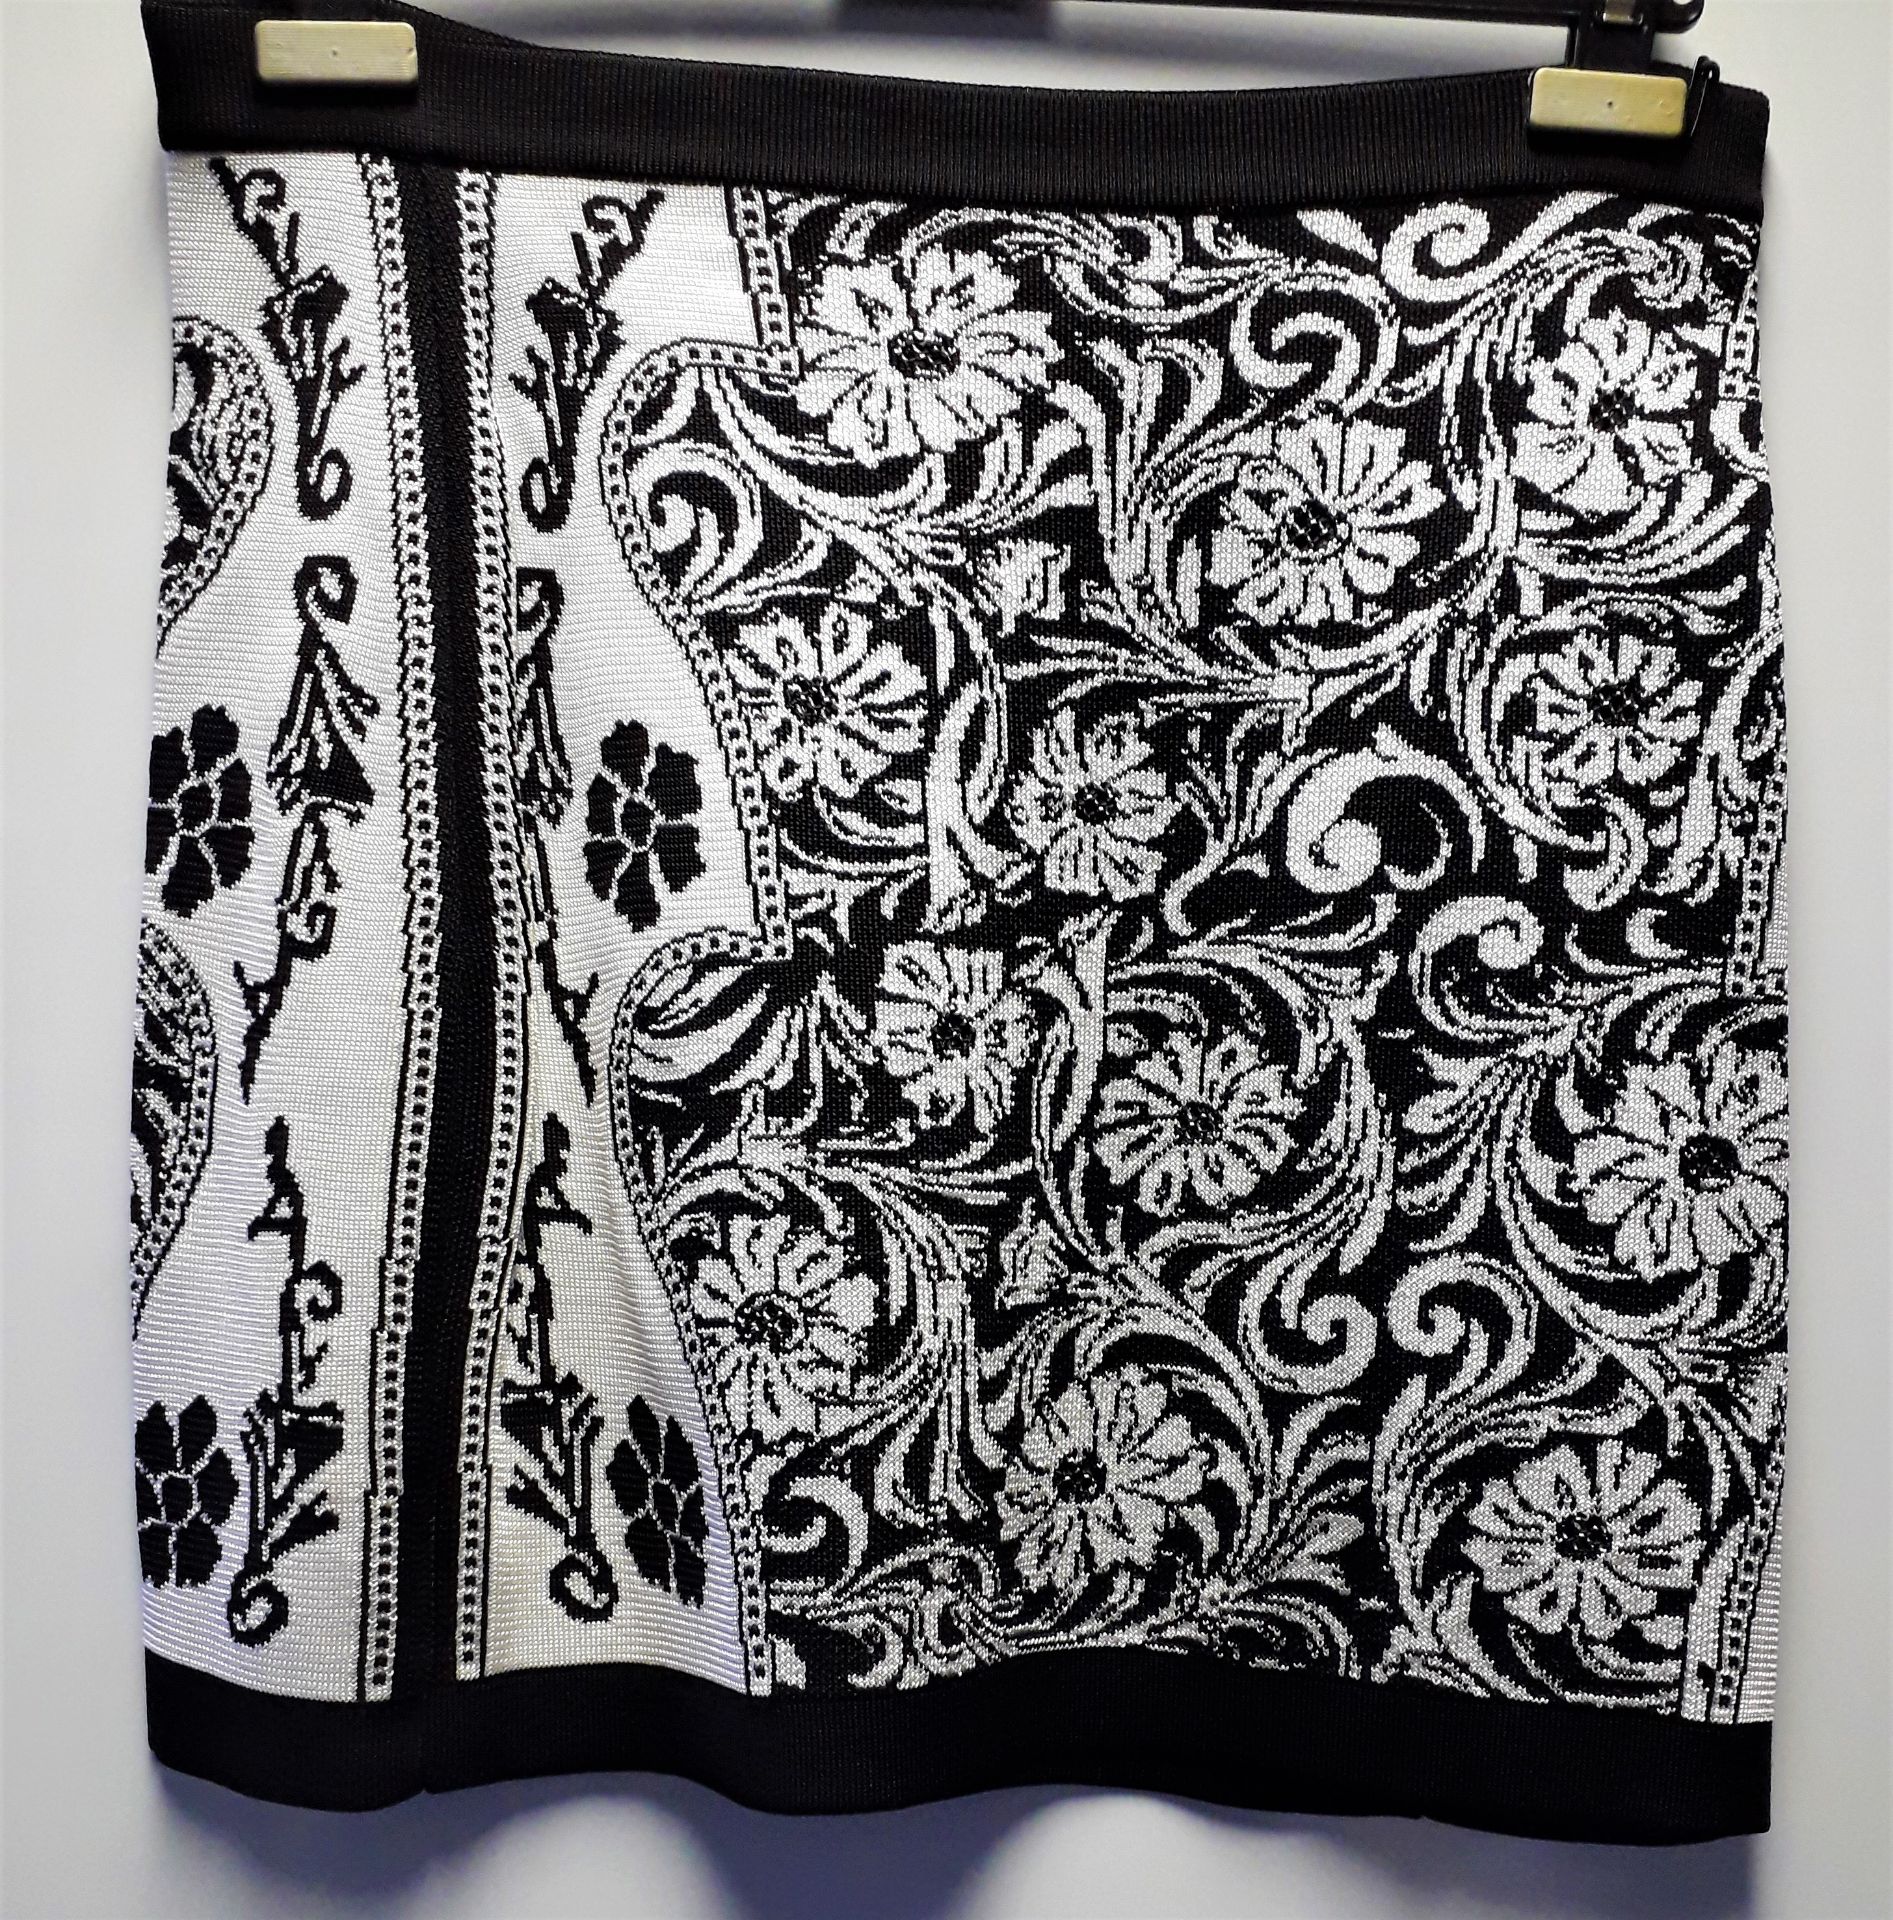 1 x Balmain White Black Mini Skirt With Zip Detail - Size: 16 - Material: 100% Viscose - From a High